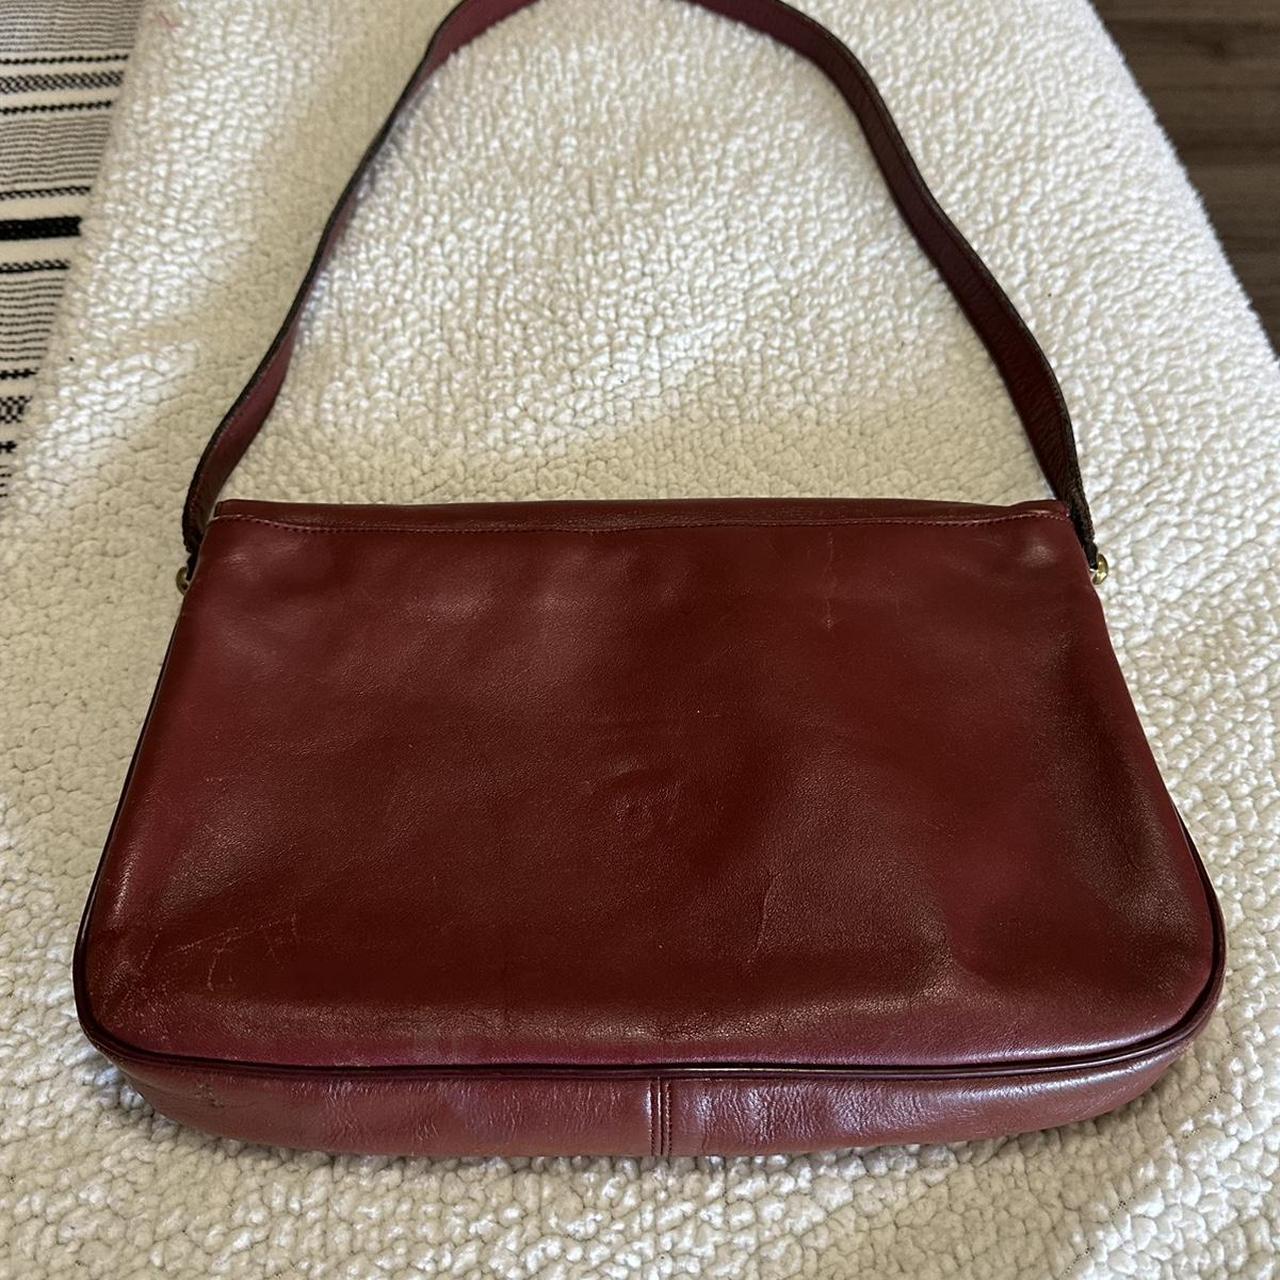 Aigner Women's Brown and Burgundy Bag (3)